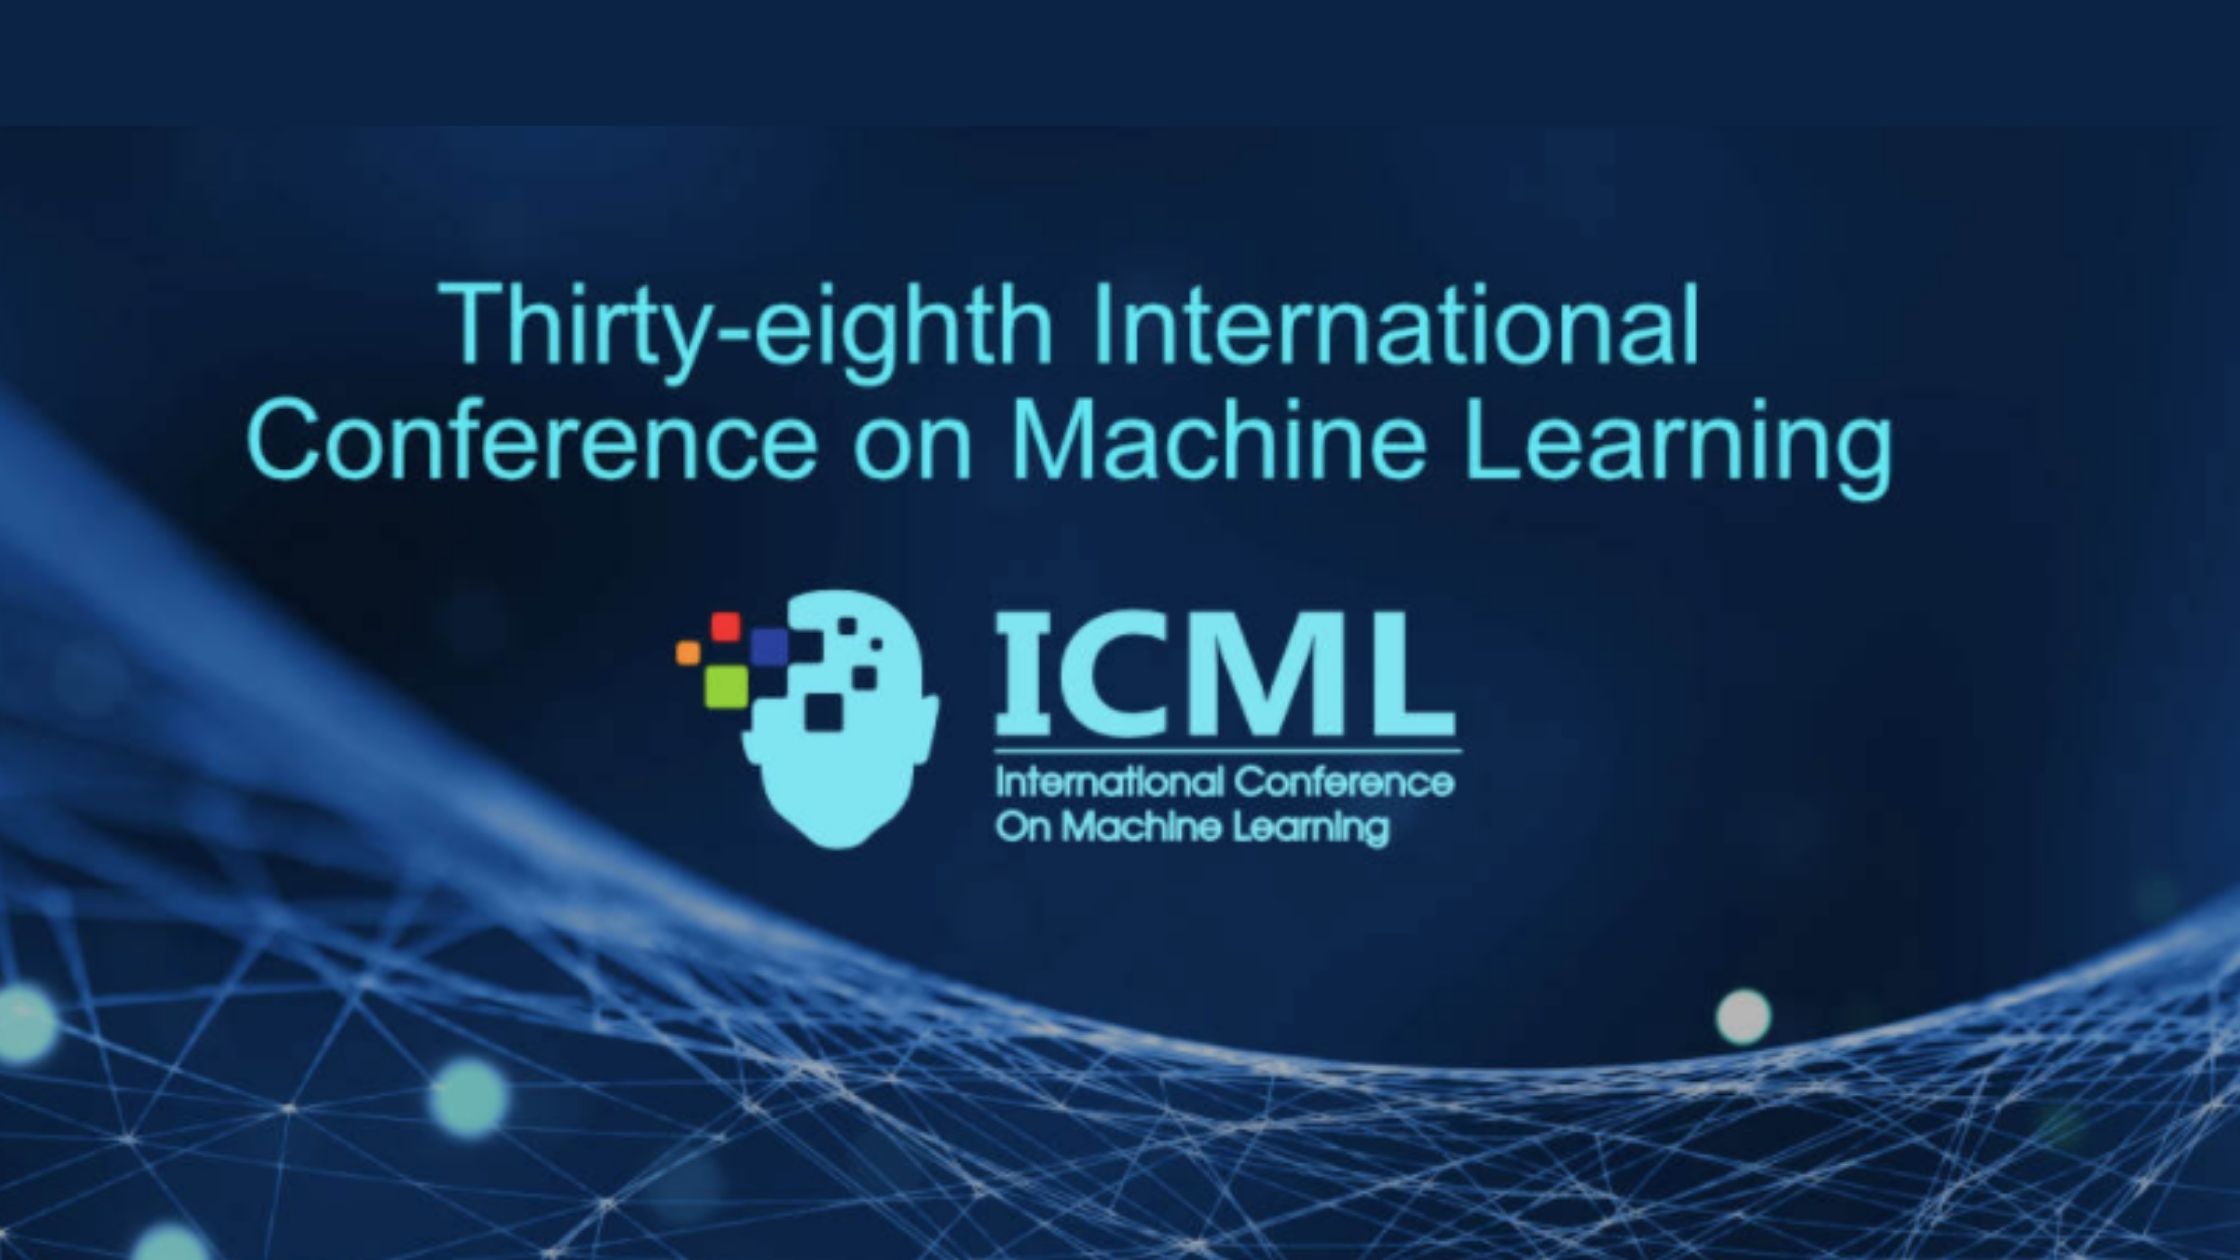 5 Best ML Research Papers At ICML 2021